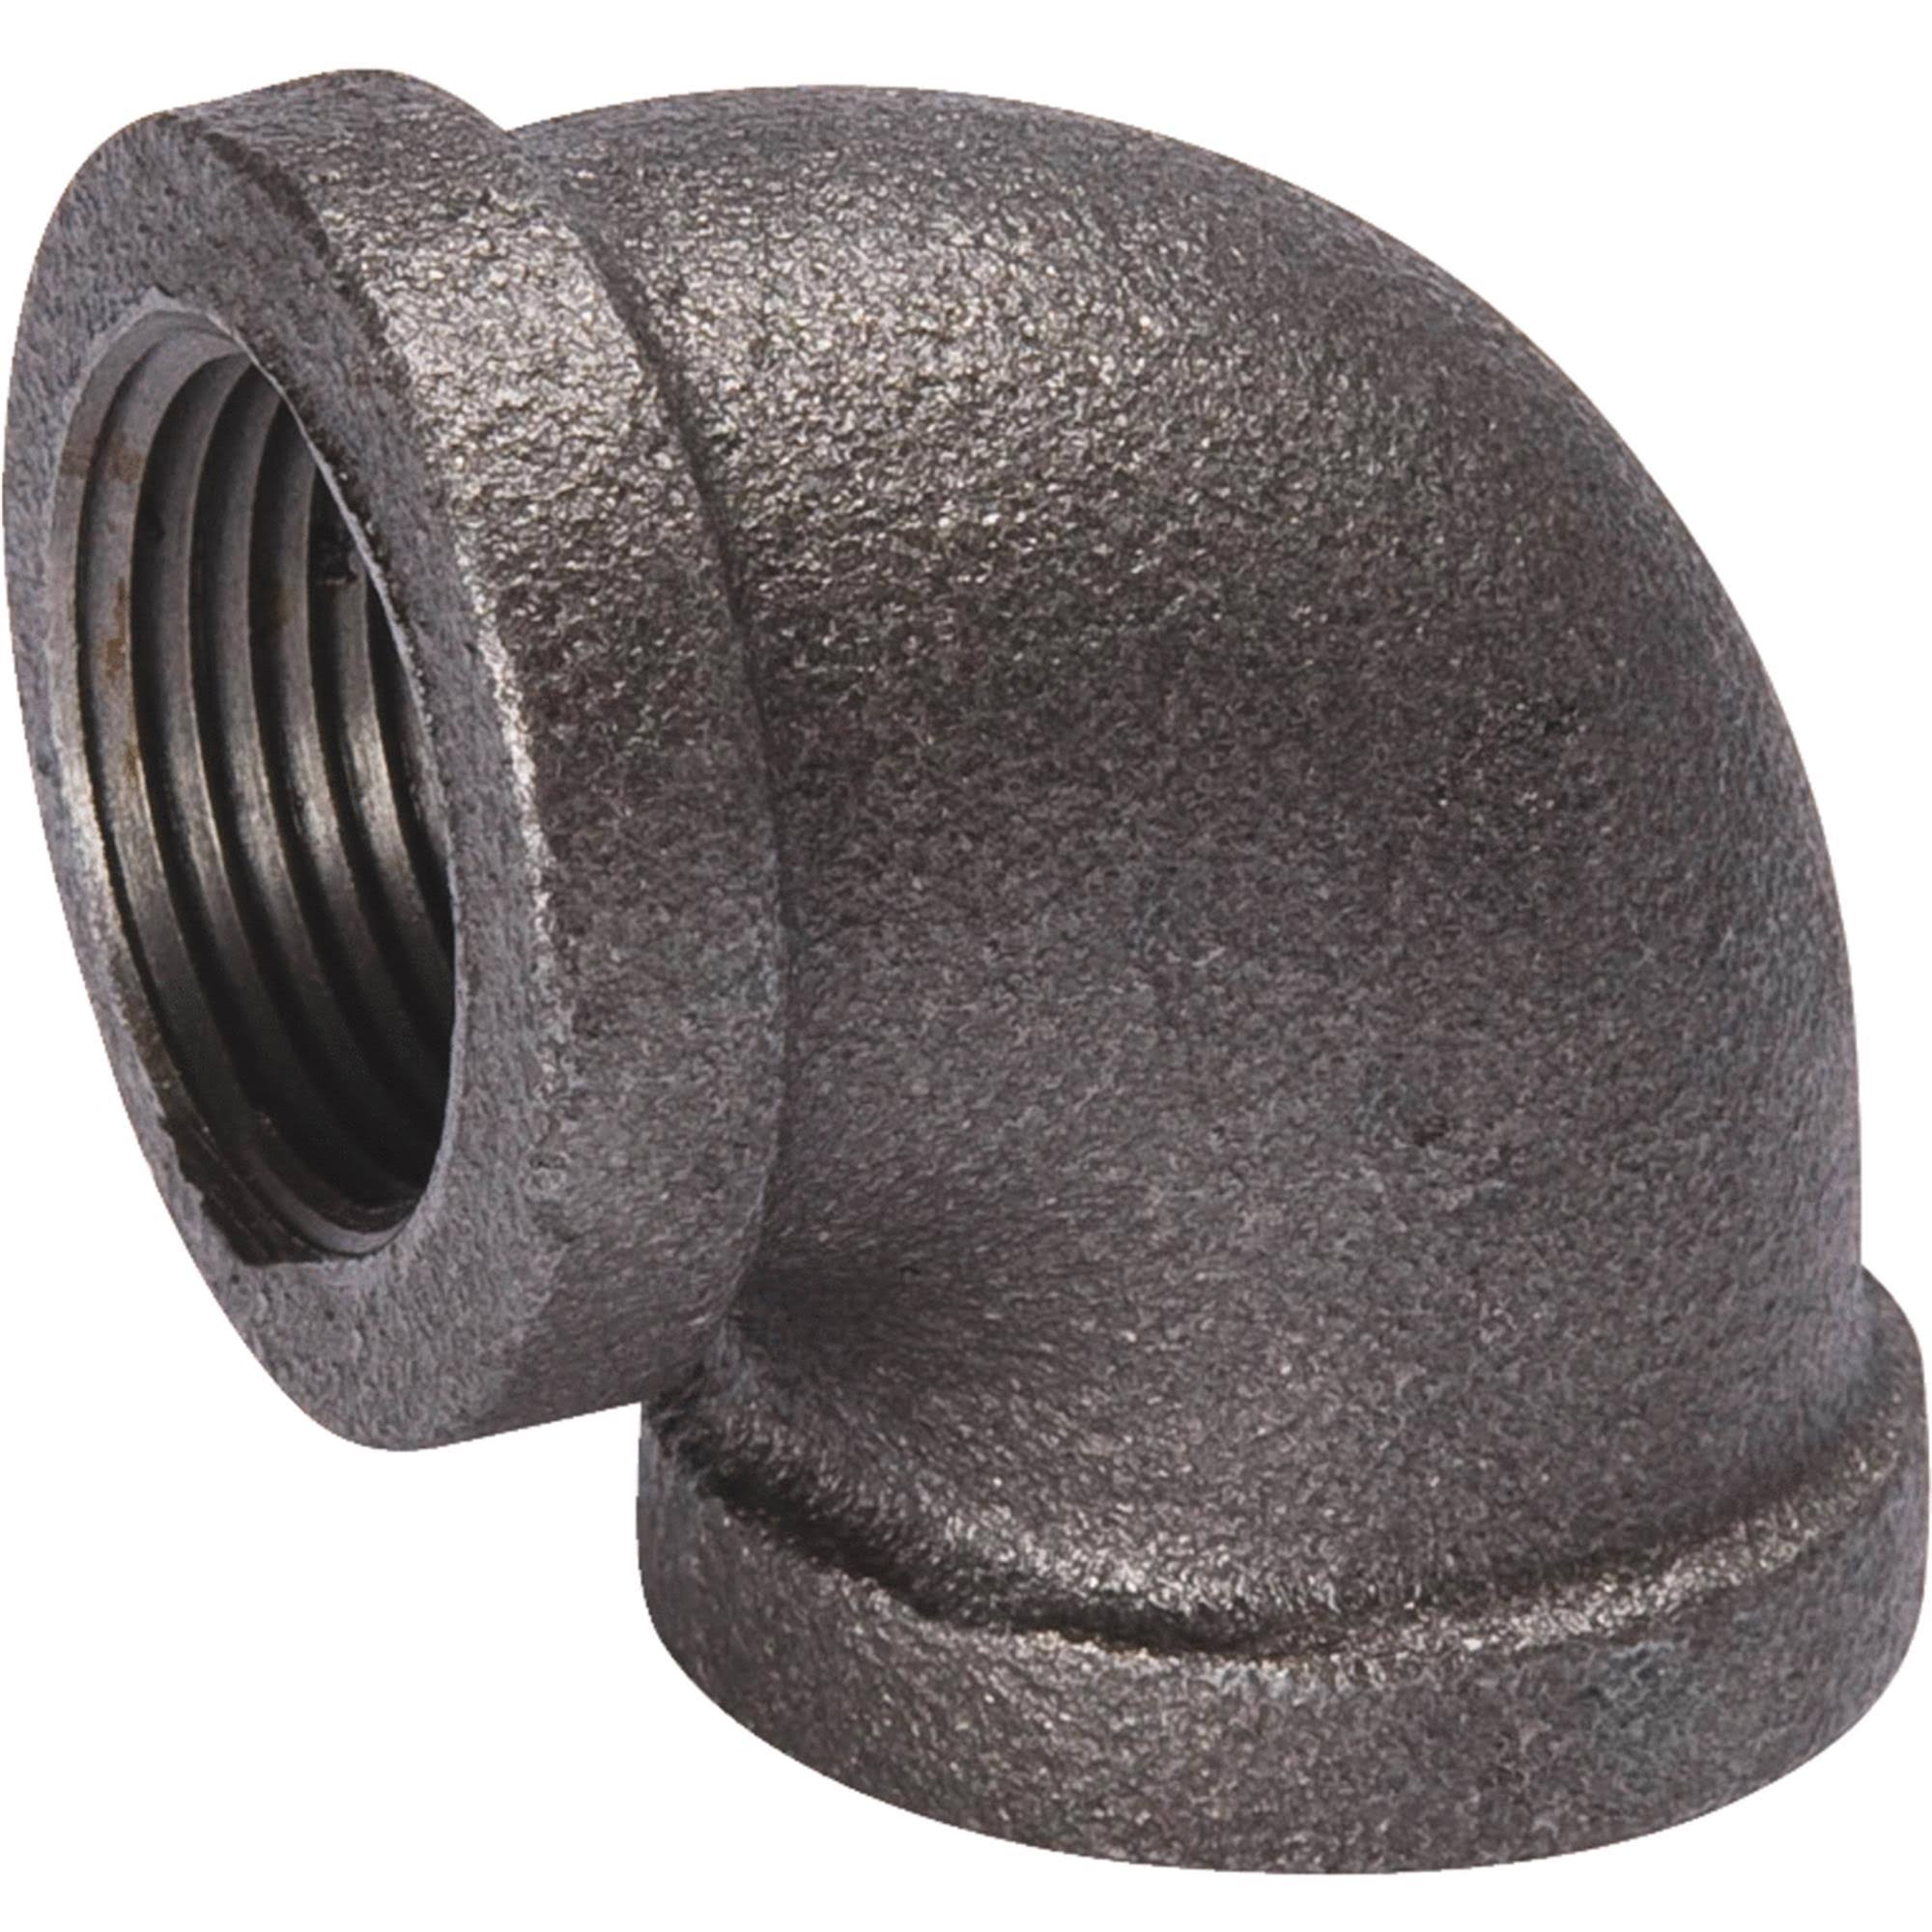 B and K Mueller Malleable Iron 90 Degree Elbow - Black, 1 1/2"